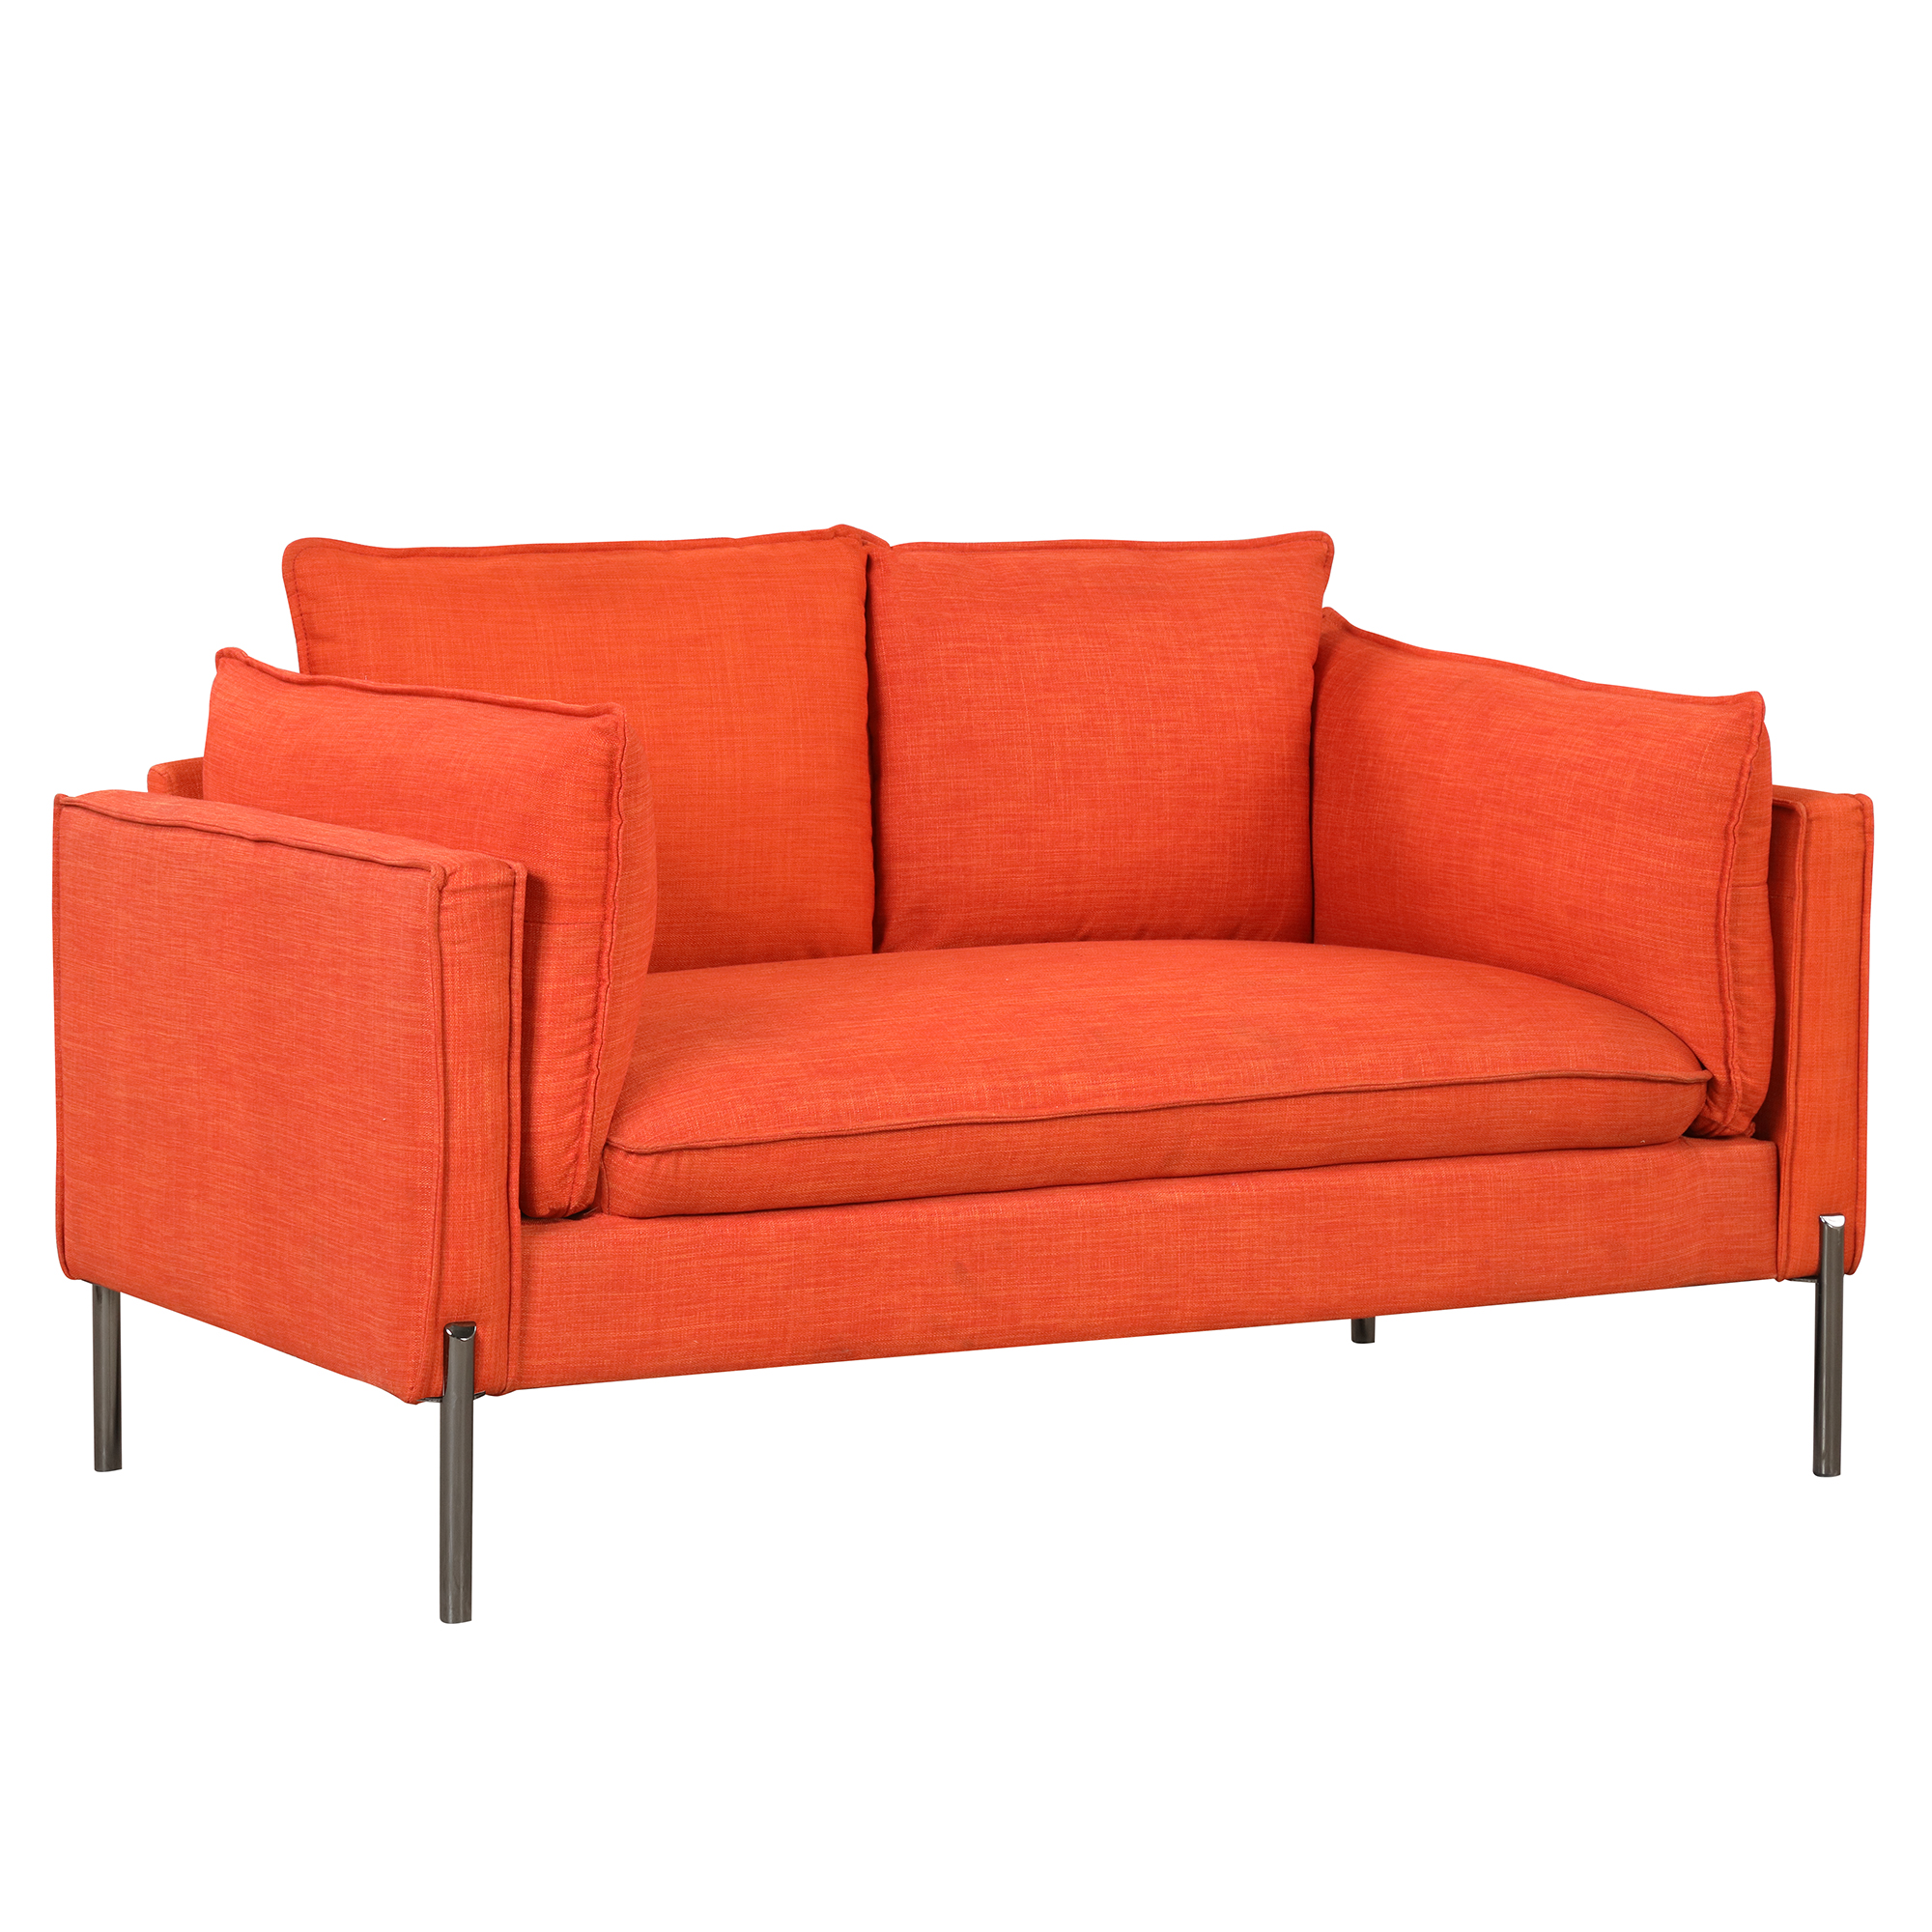 Orisfur.Modern Style Sofa Linen Fabric Loveseat Small Love Seats Couch for Small Spaces,Living Room,Apartment